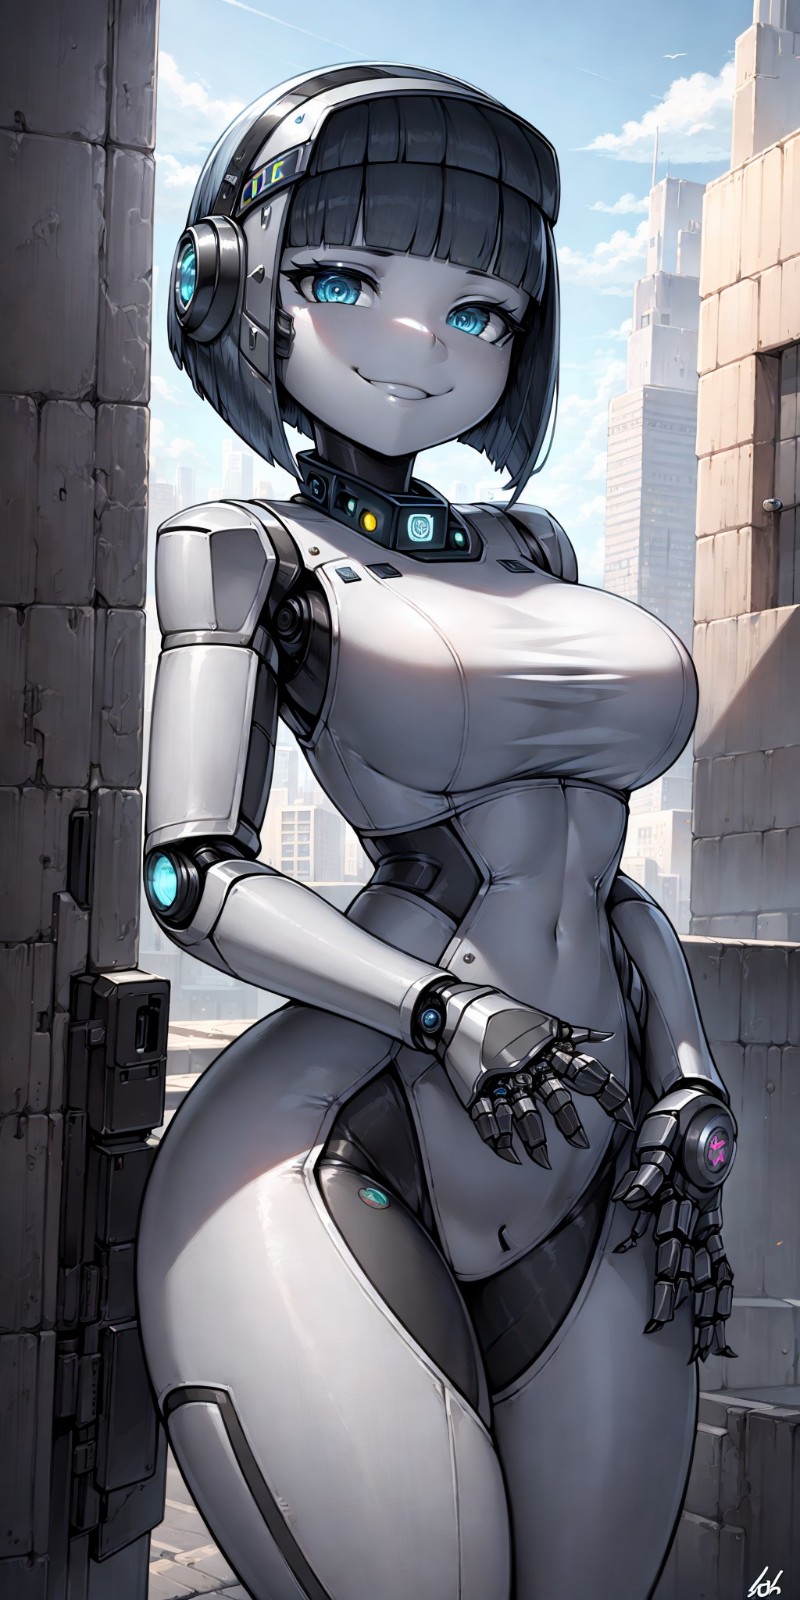 Avatar of PO-149 the Horny Cop Bot